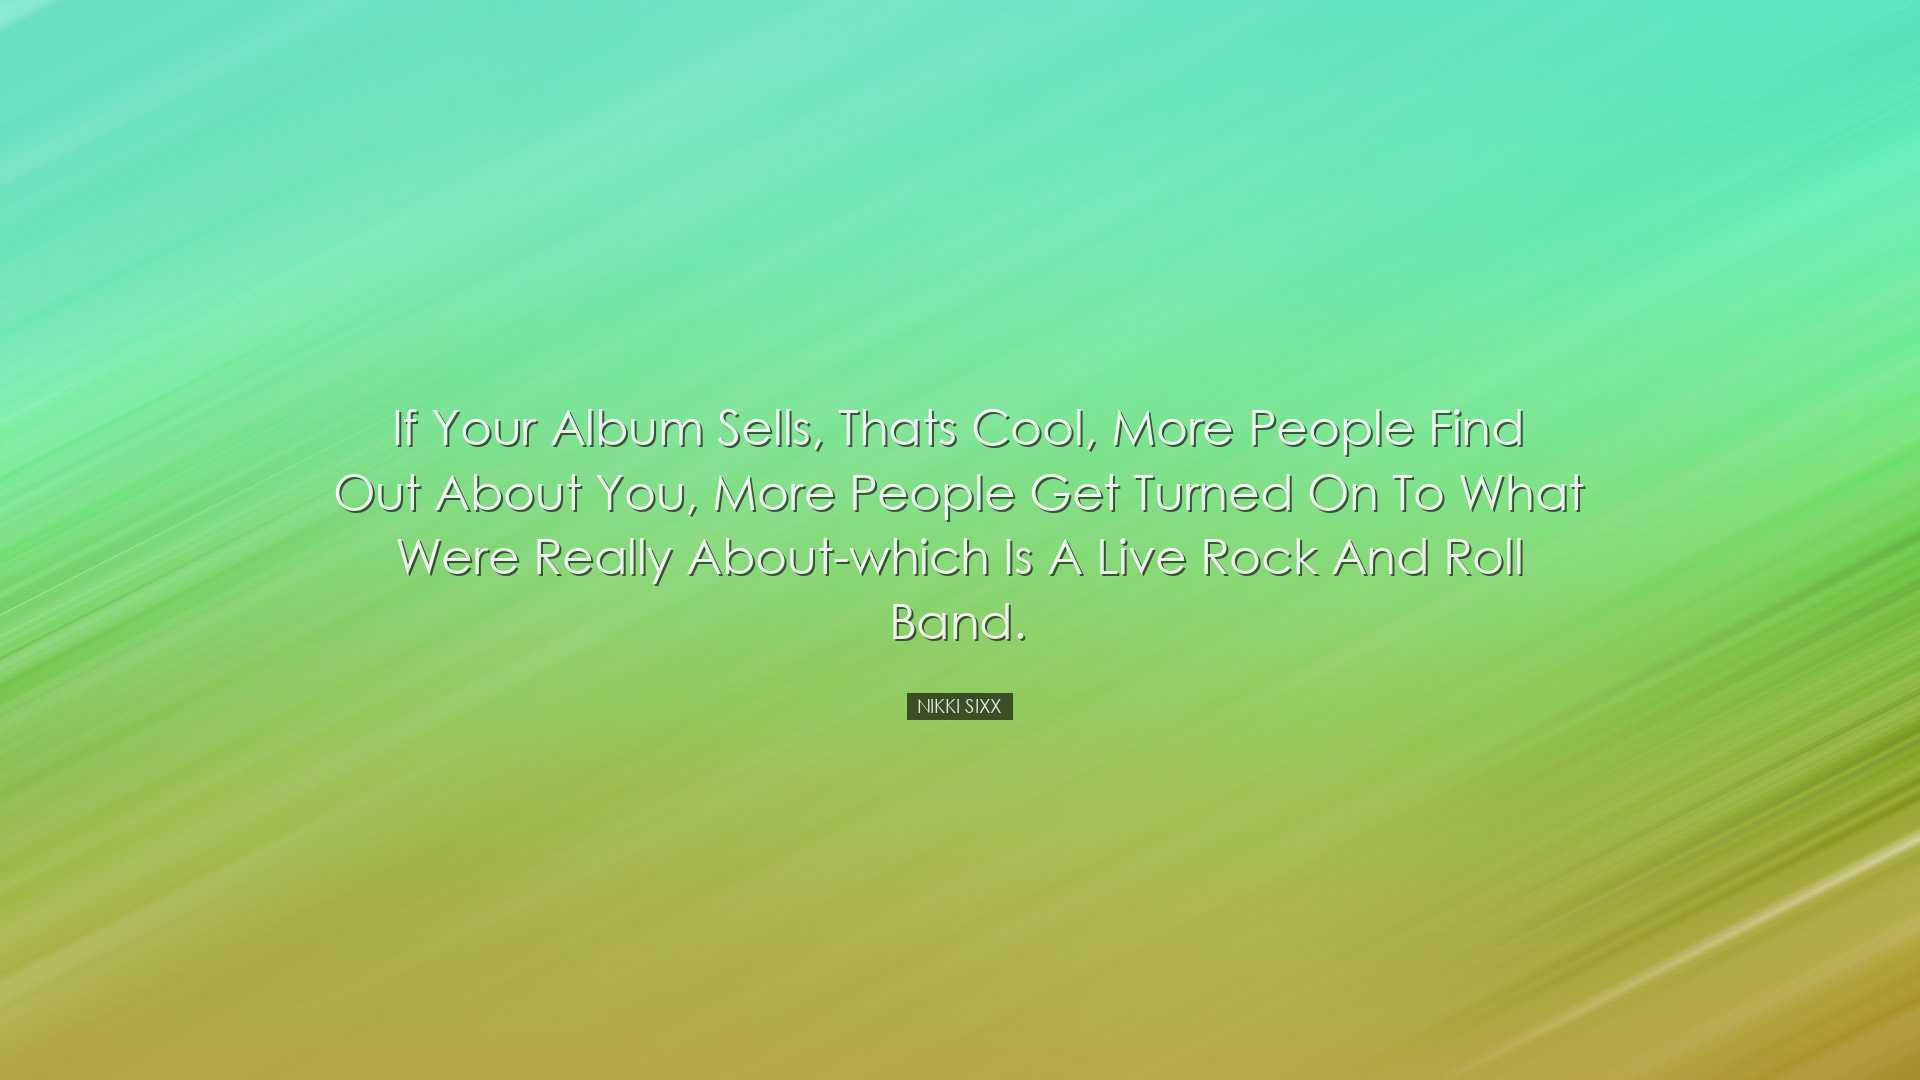 If your album sells, thats cool, more people find out about you, m